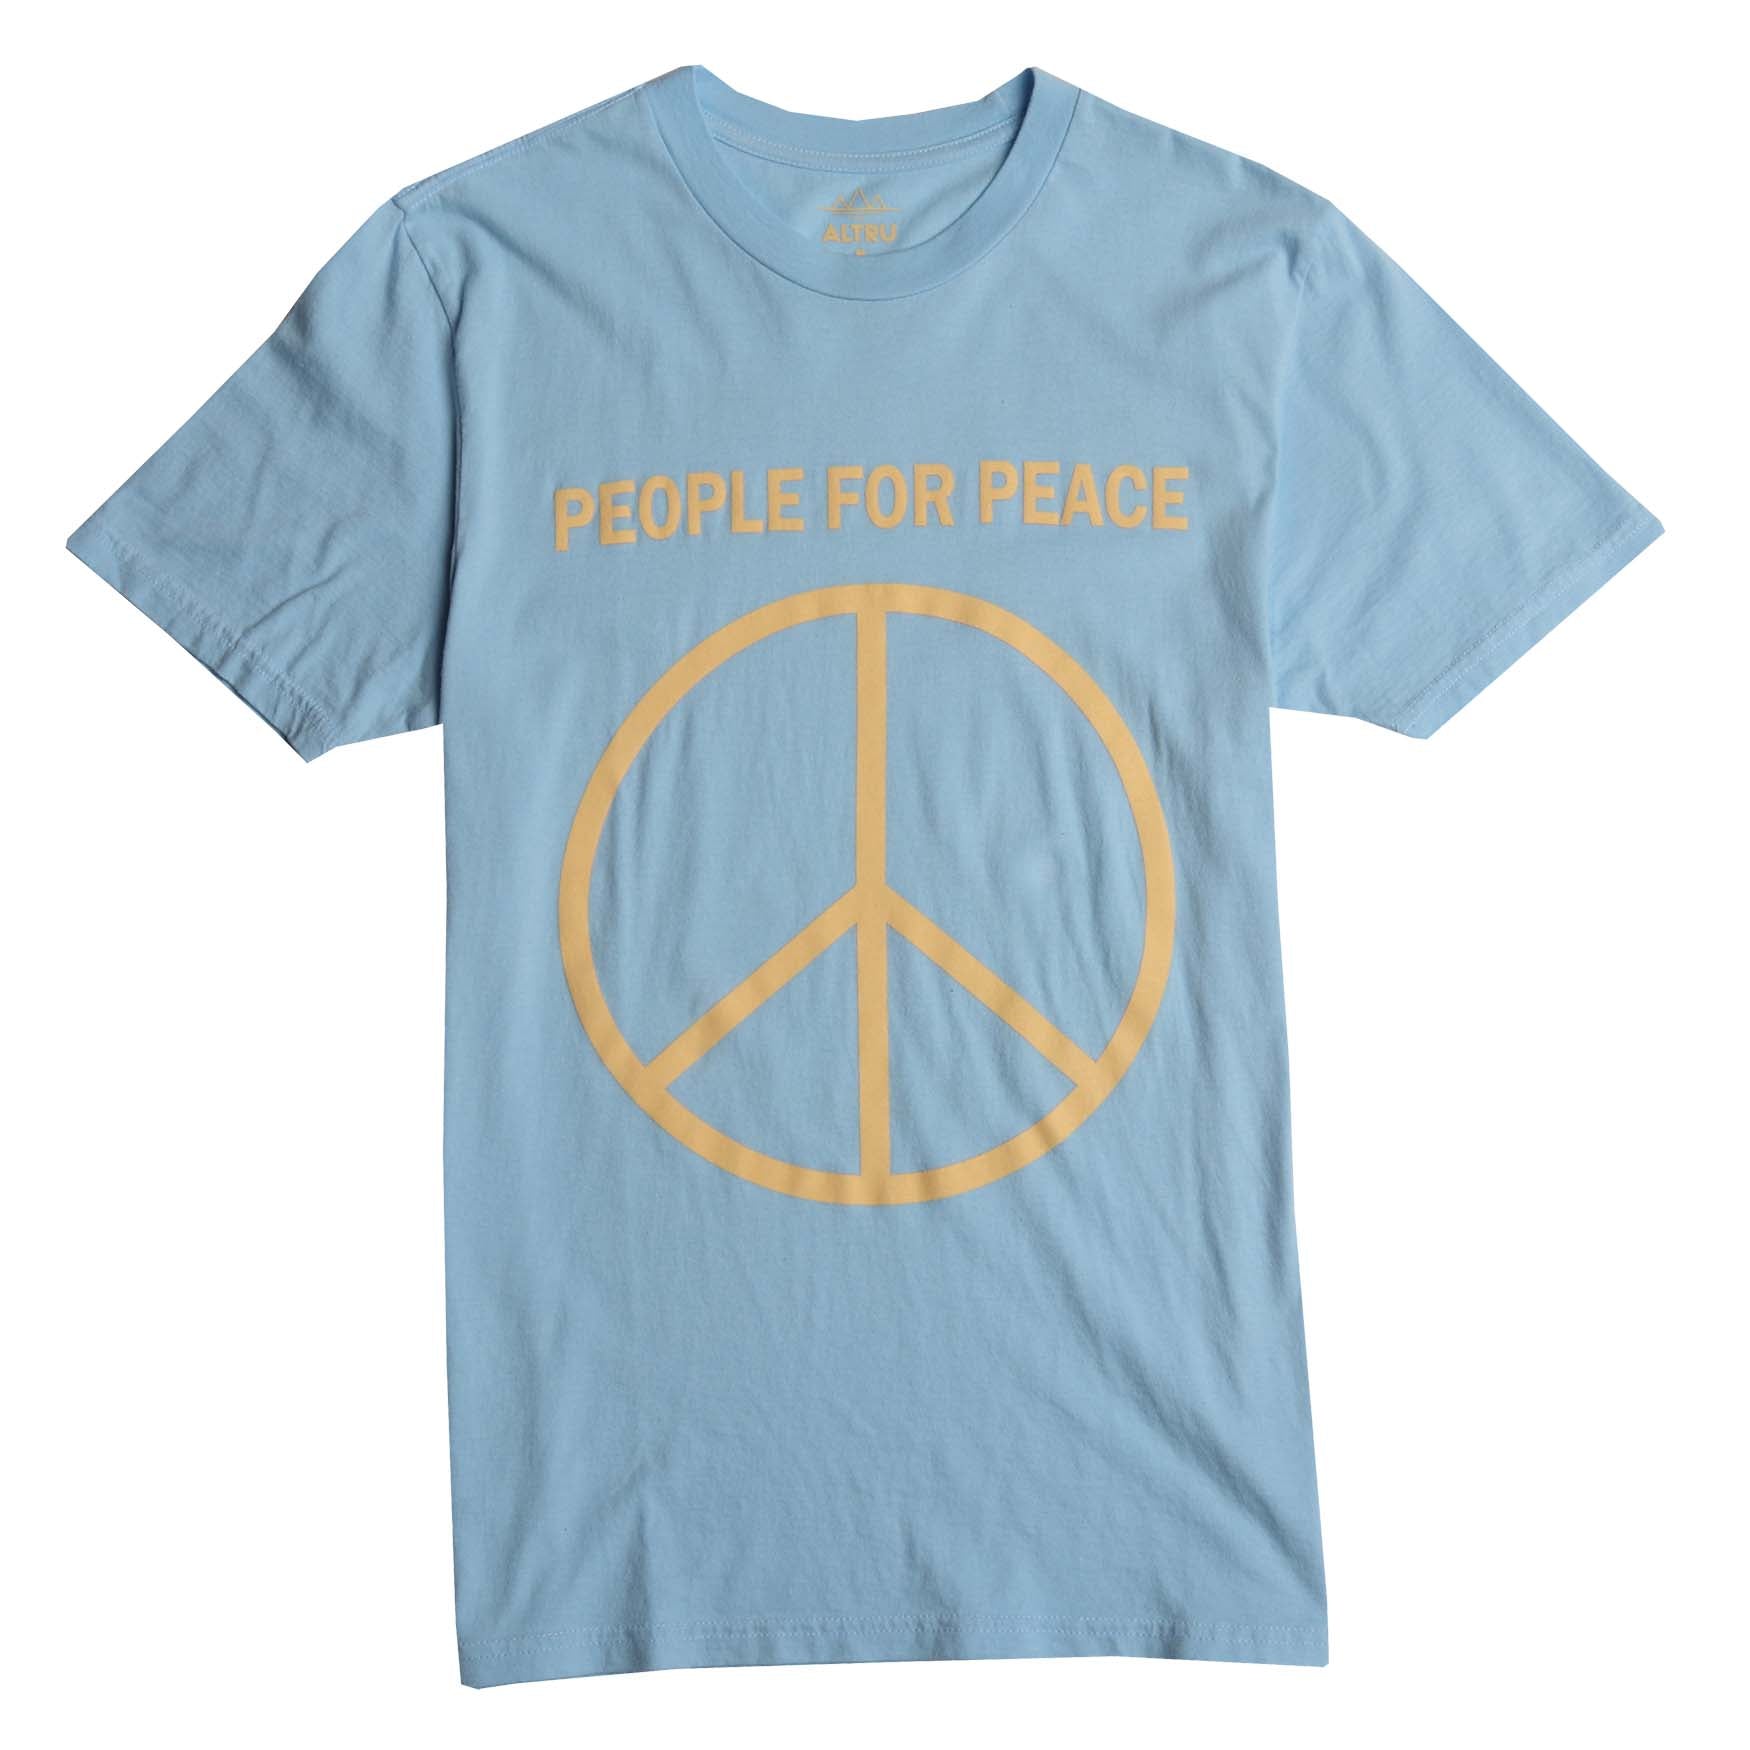 PEOPLE FOR PEACE graphic tee